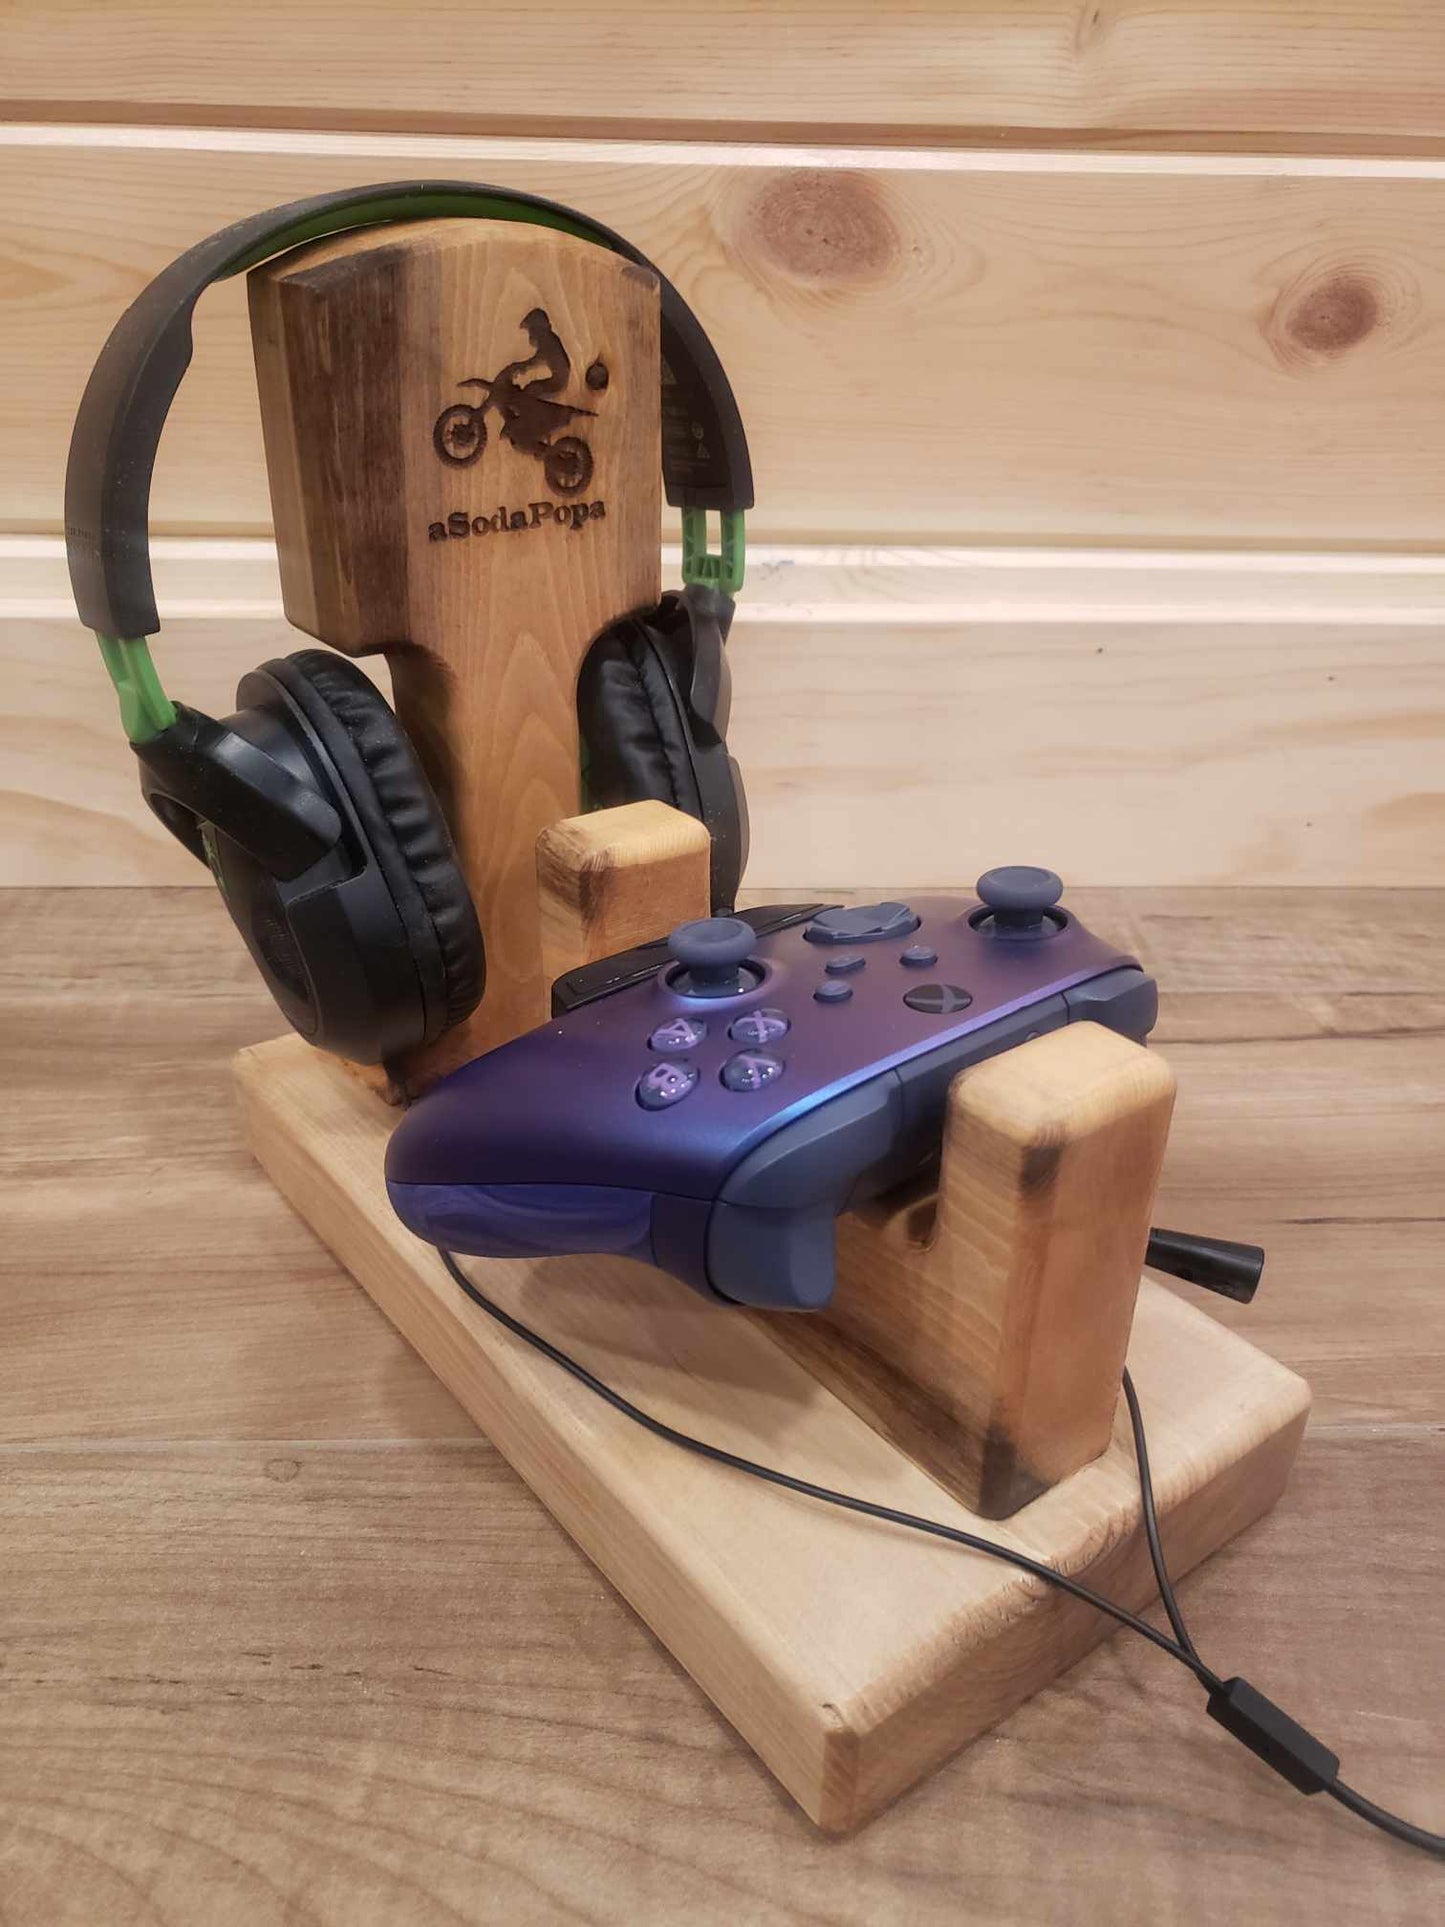 Customizable controller and headphone stand